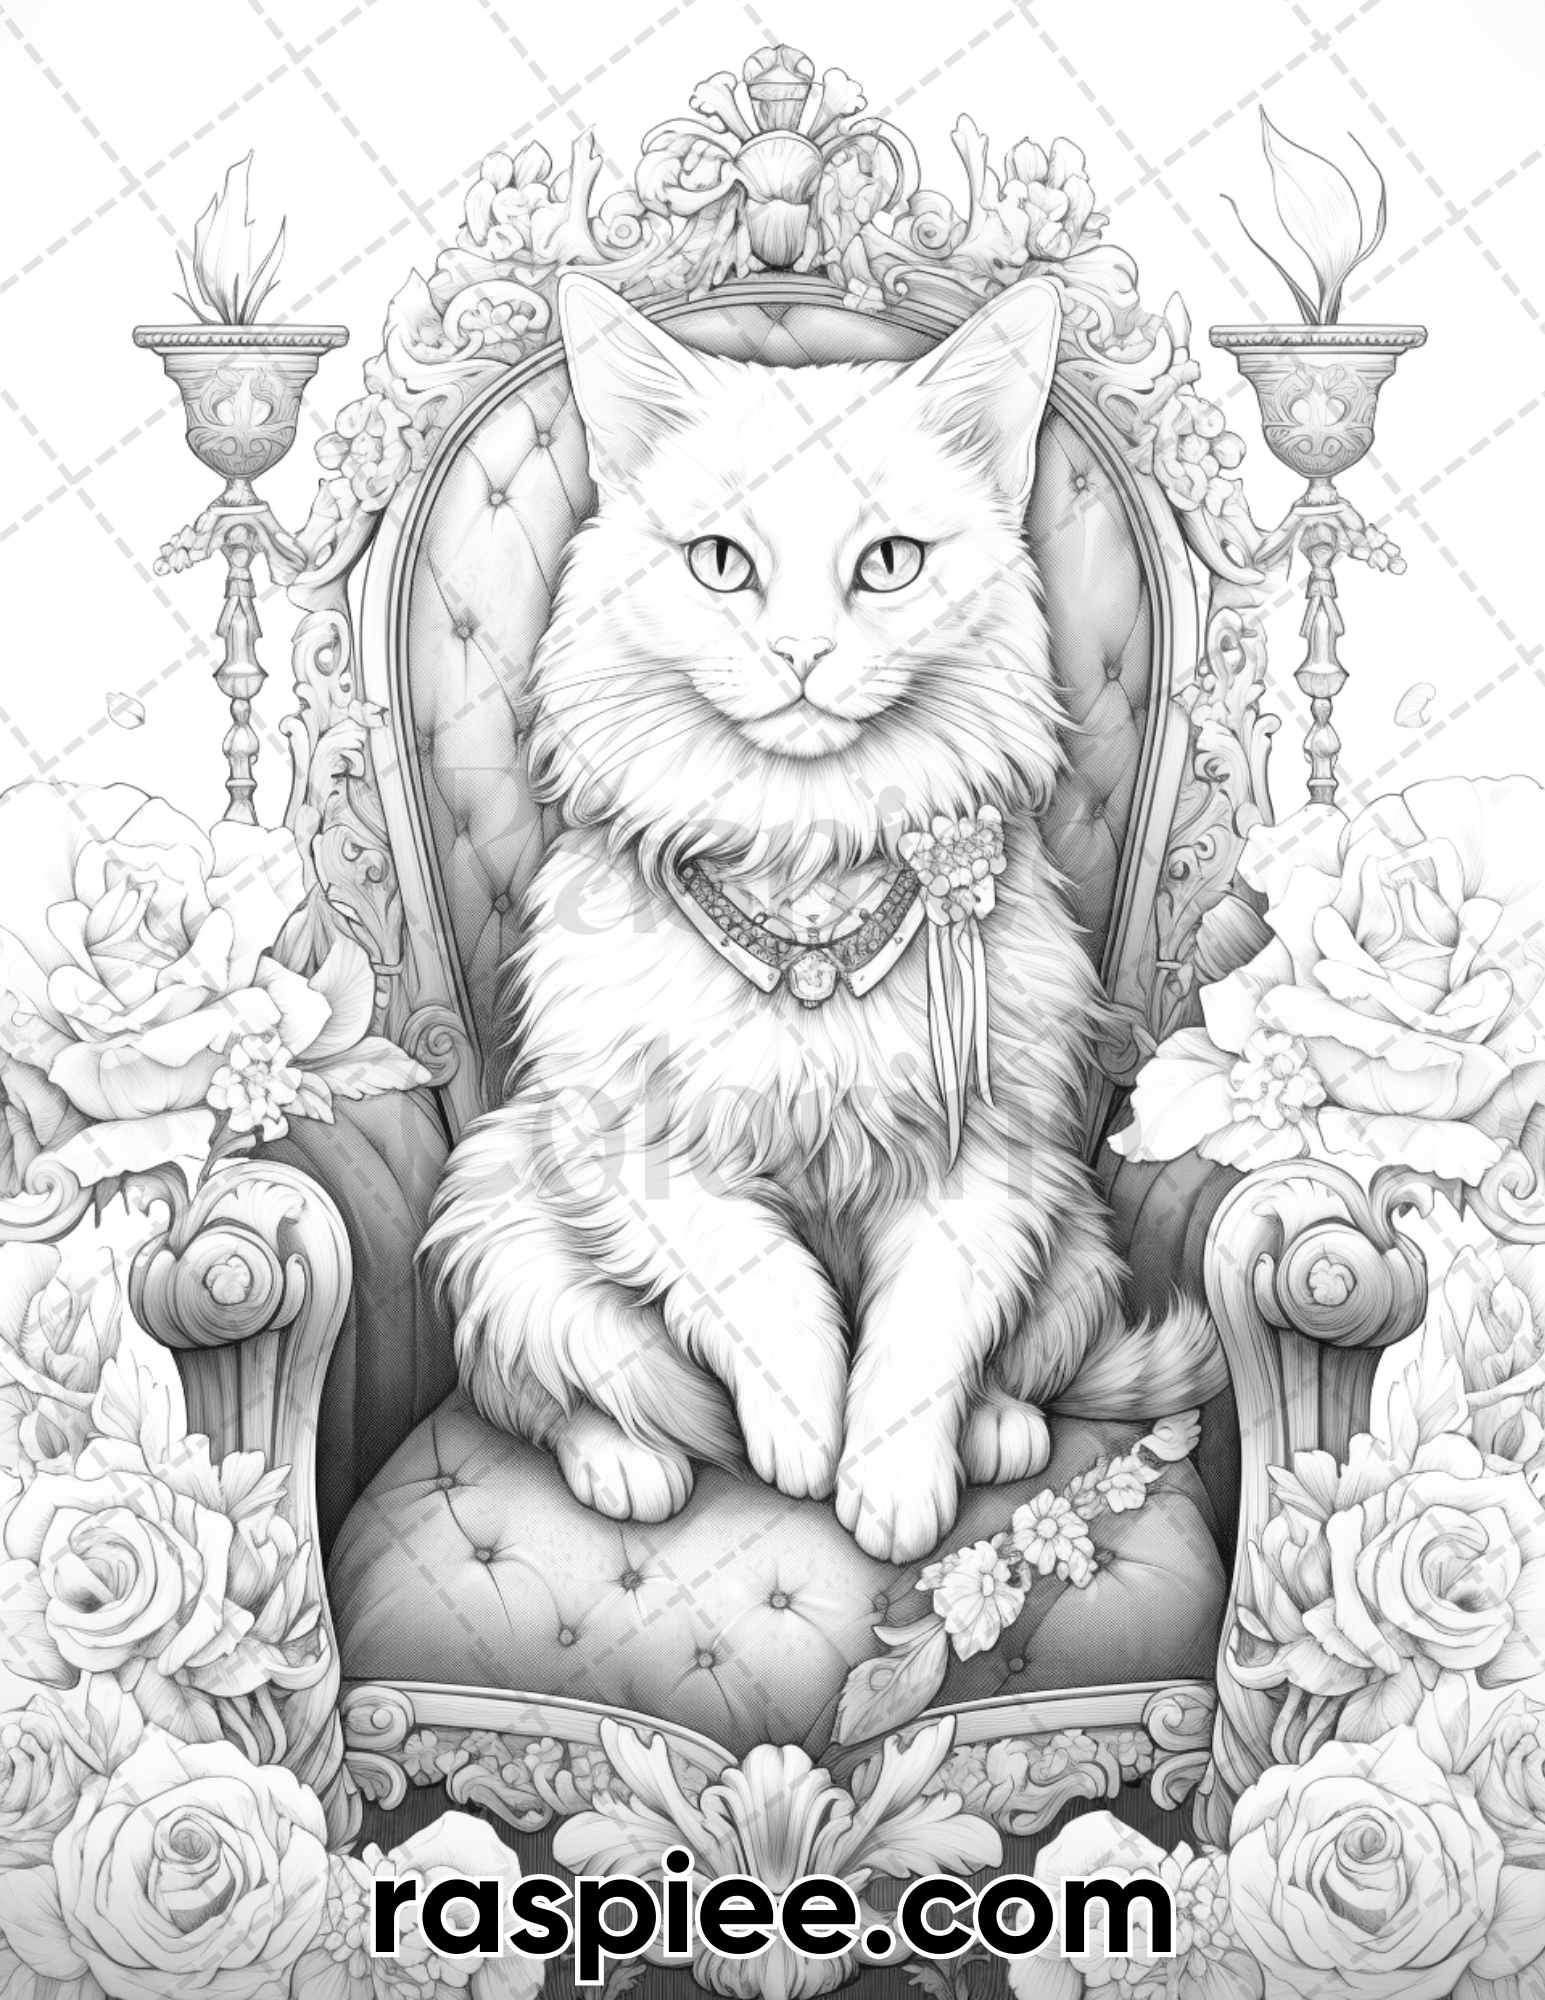 Cats Coloring Book: Realistic Adult Coloring Book, Advanced Cat Coloring Book for Adults [Book]